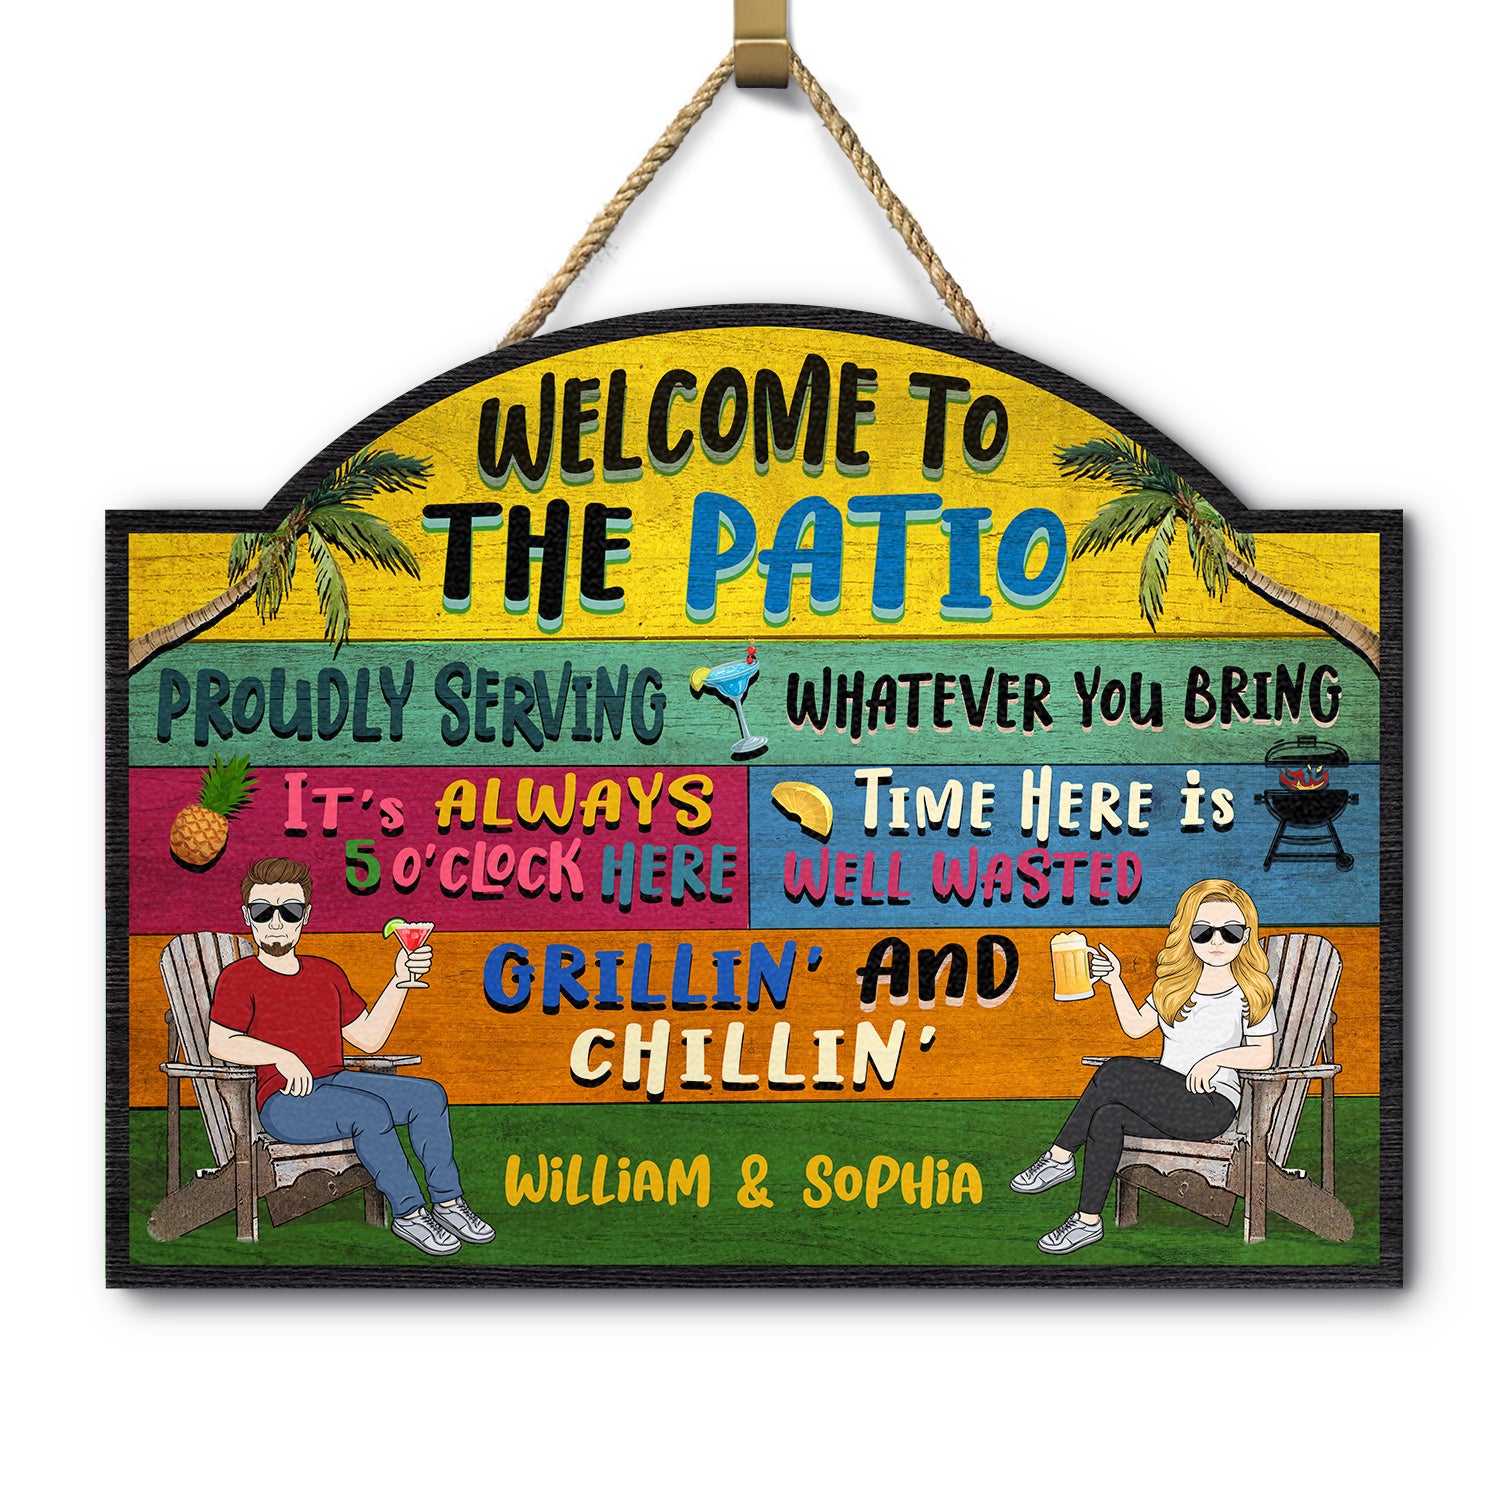 Patio Welcome Grilling Proudly Serving Whatever You Bring Couple Single - Home Decor, Backyard Decor, Gift For Her, Him, Family, Couples, Husband, Wife - Personalized Custom Shaped Wood Sign